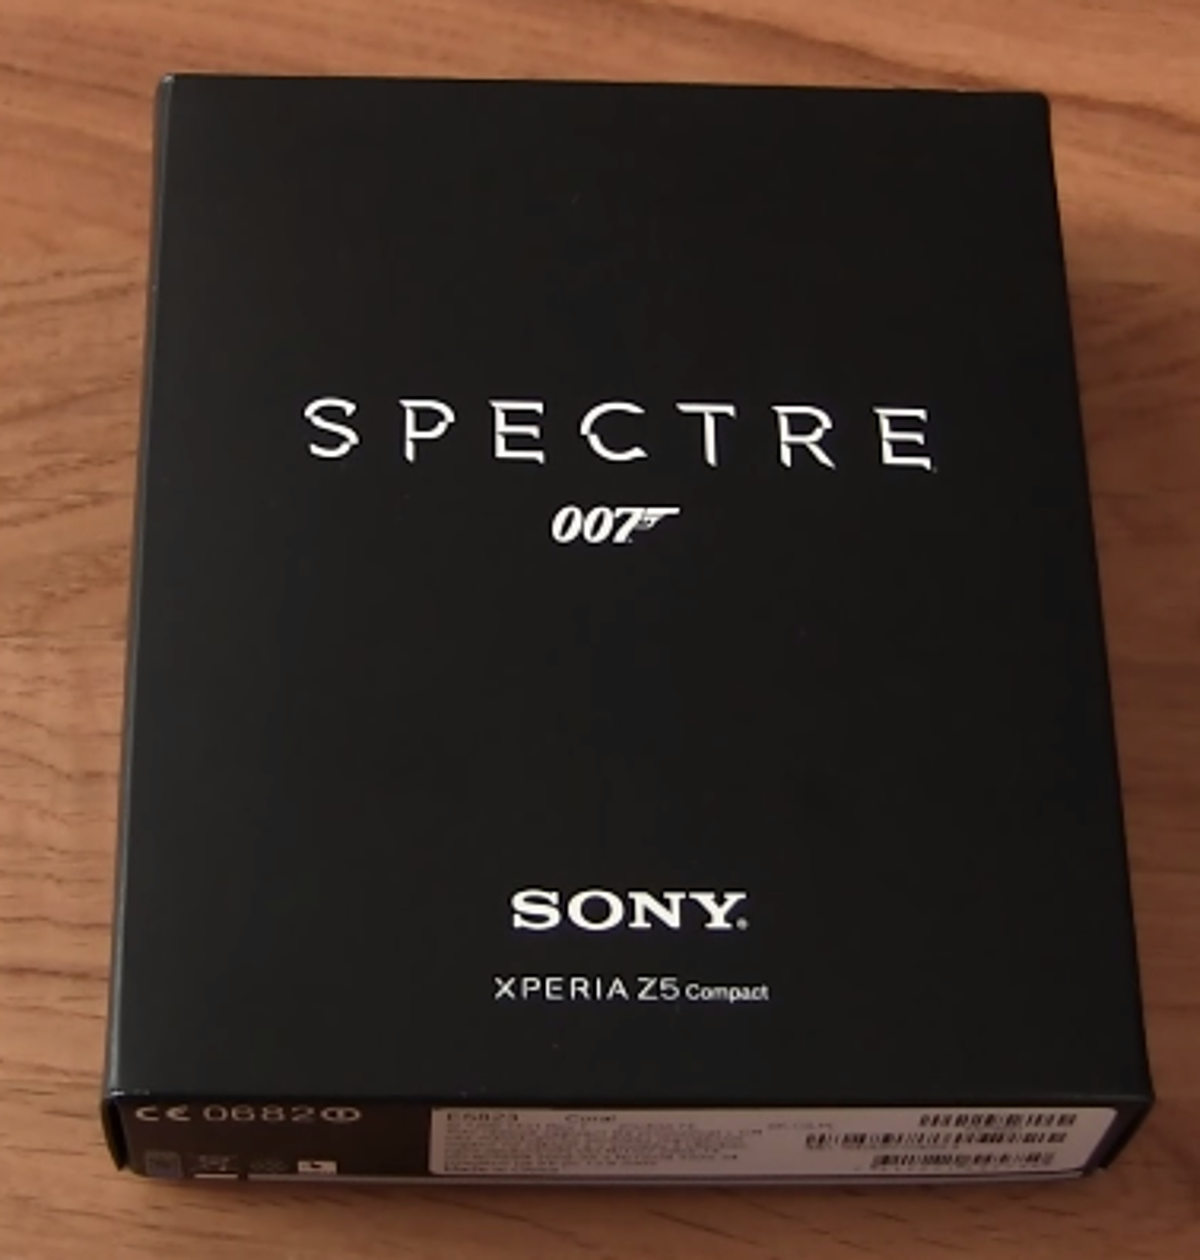 Spectre compact. Sony Xperia 7.